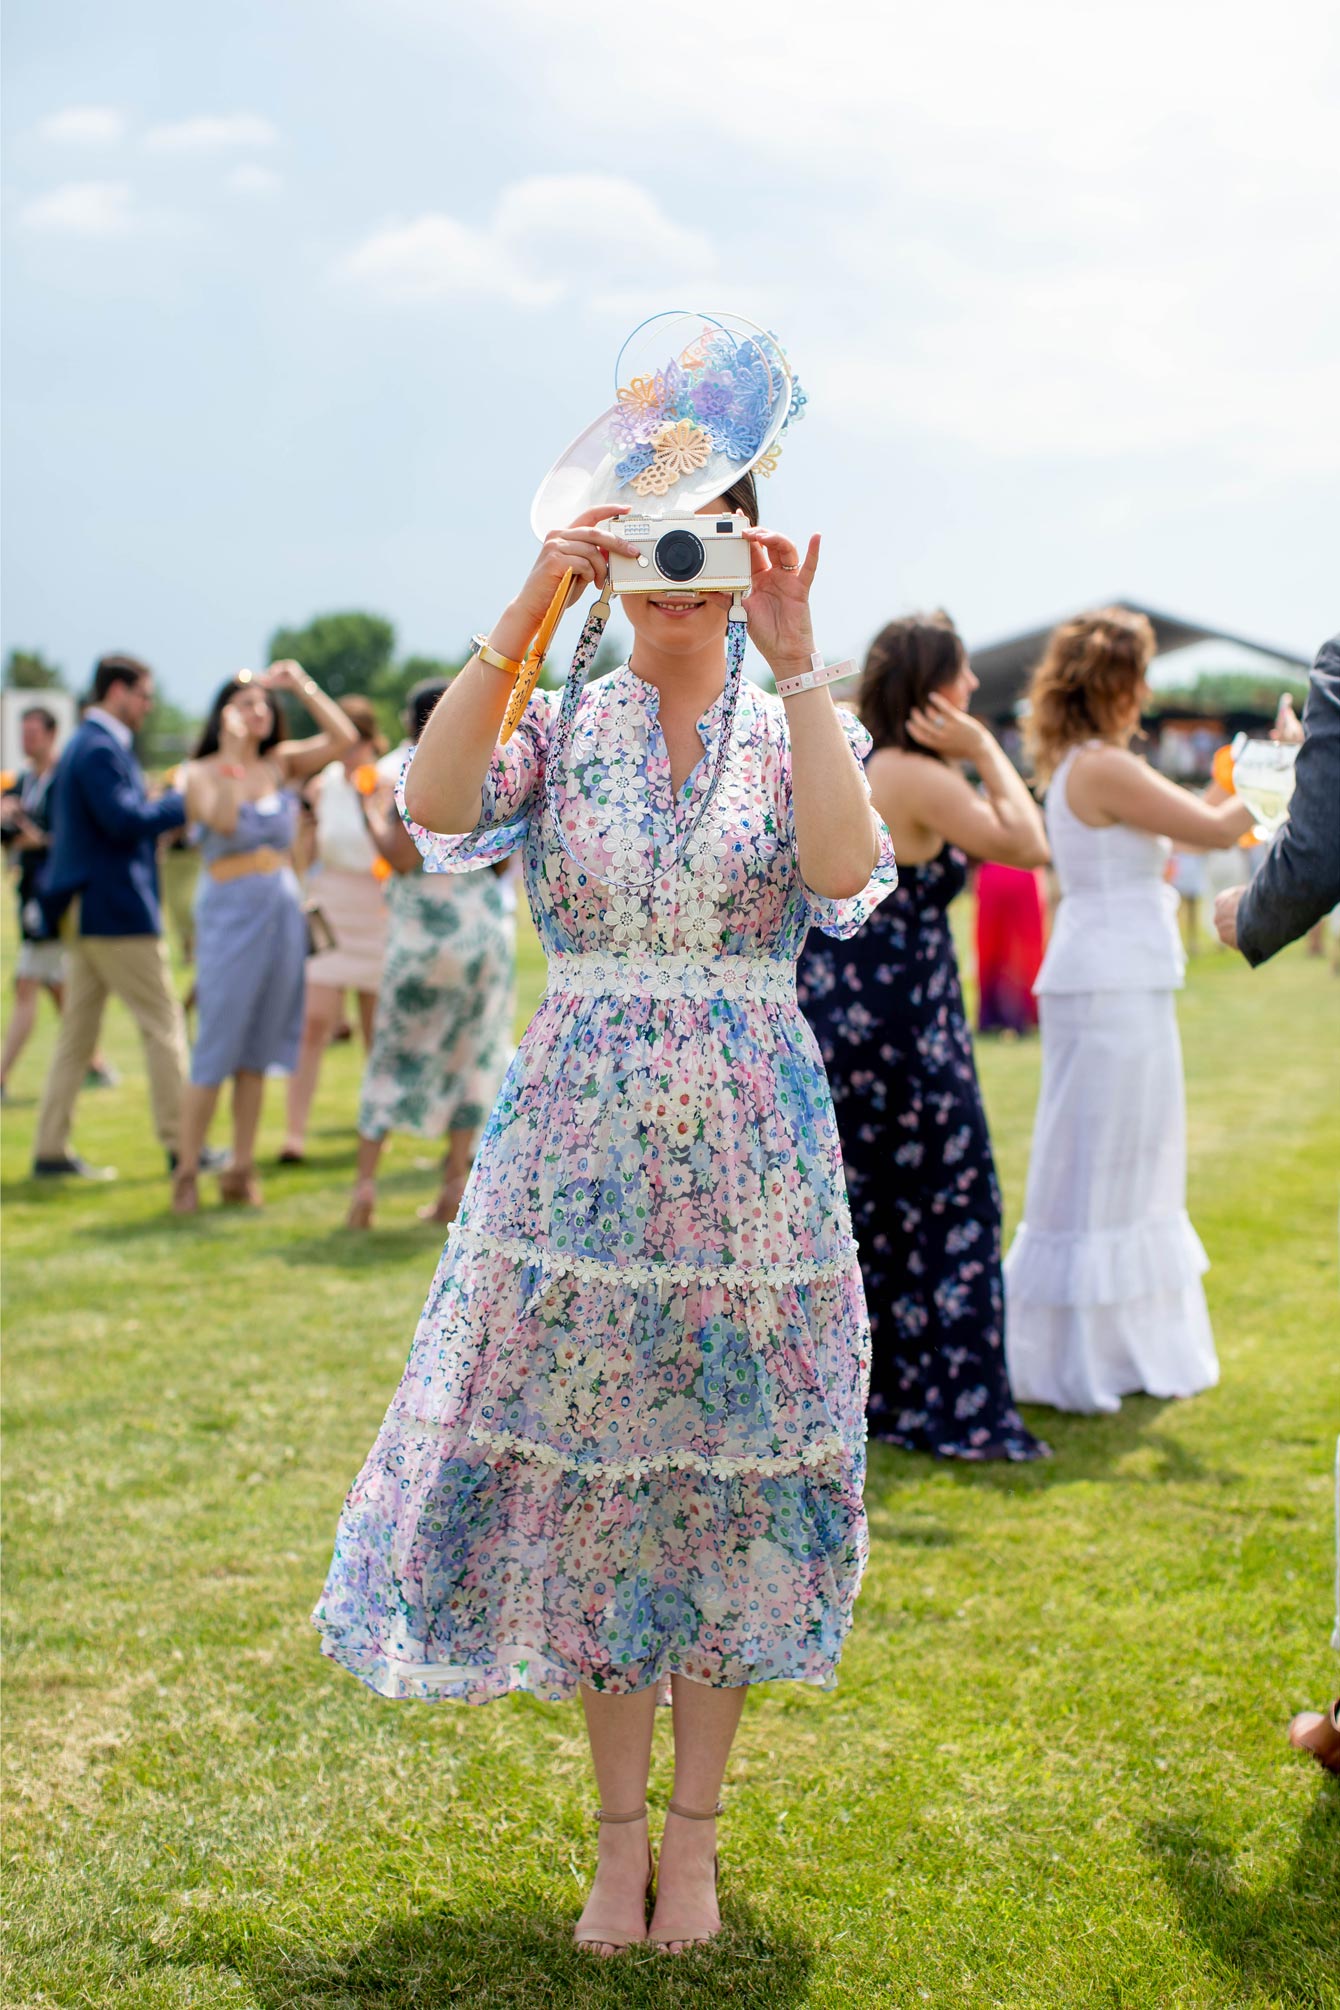 Veuve Clicquot Polo Classic Party — Herb Your Enthusiasm LLC